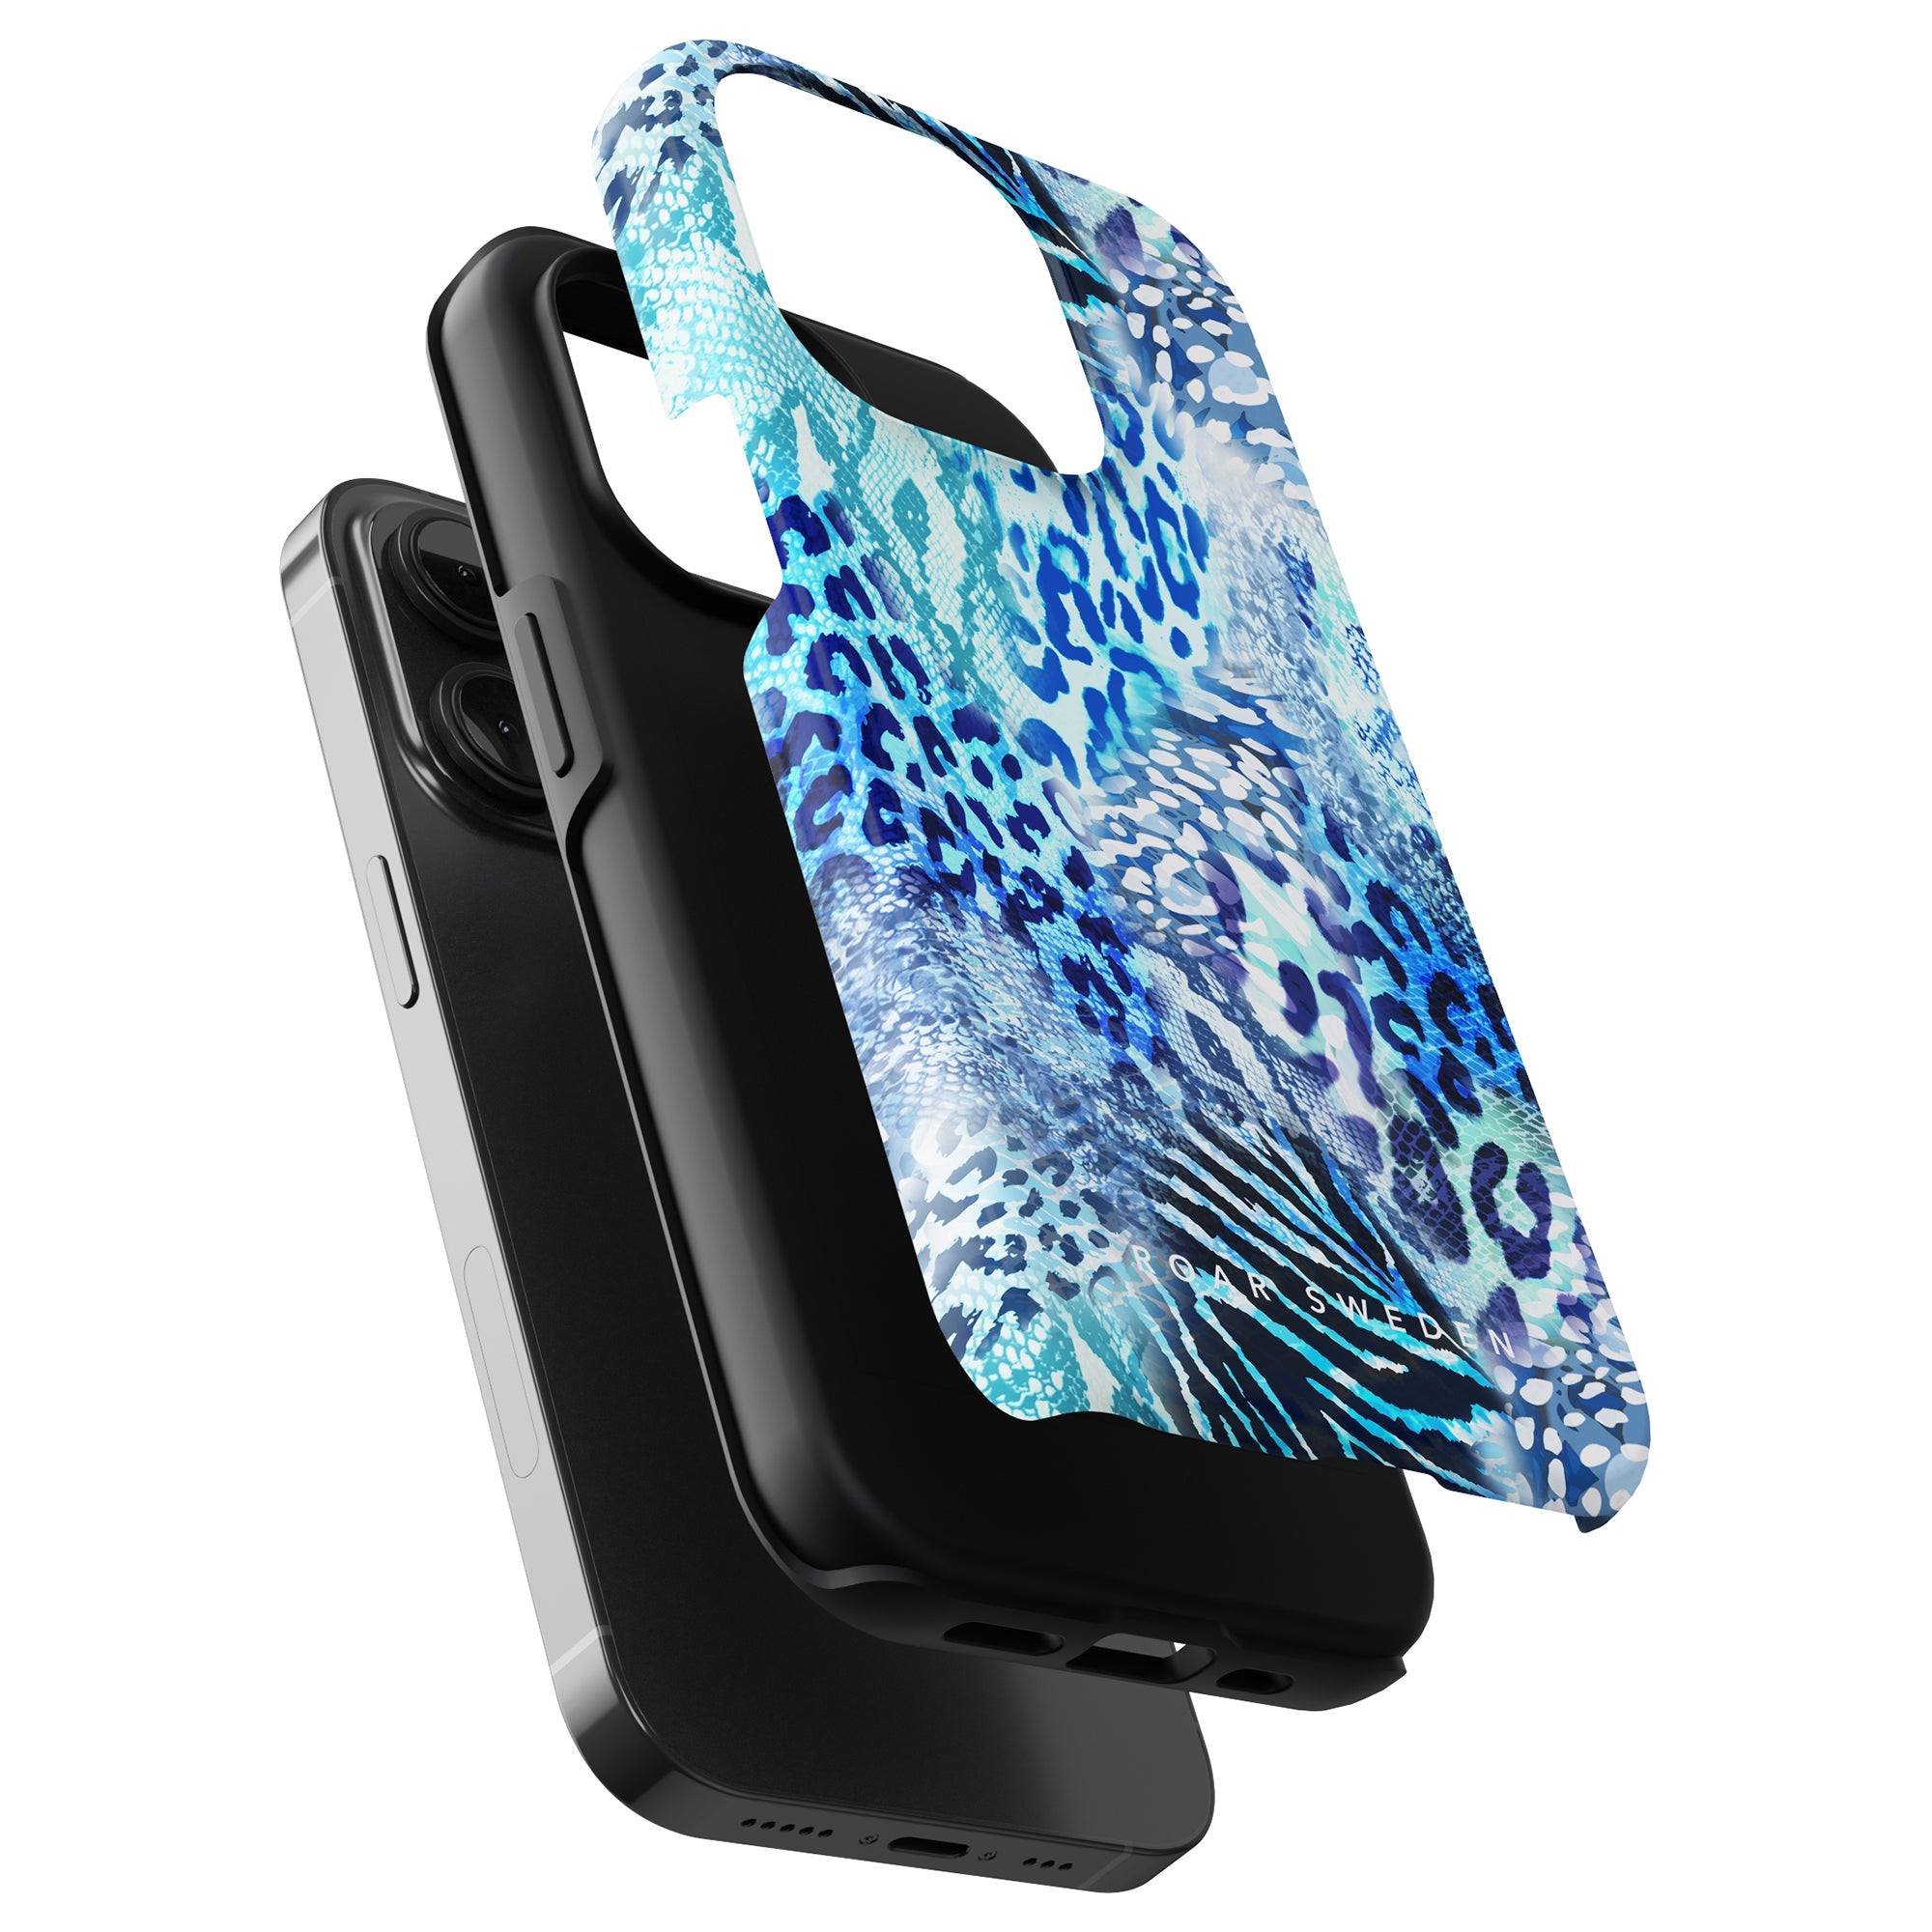 Three-layer tough case with a colorful blue and black animal print design, shown partially assembled on a smartphone. This Snow Leopard - Tough Case combines style and protection seamlessly.